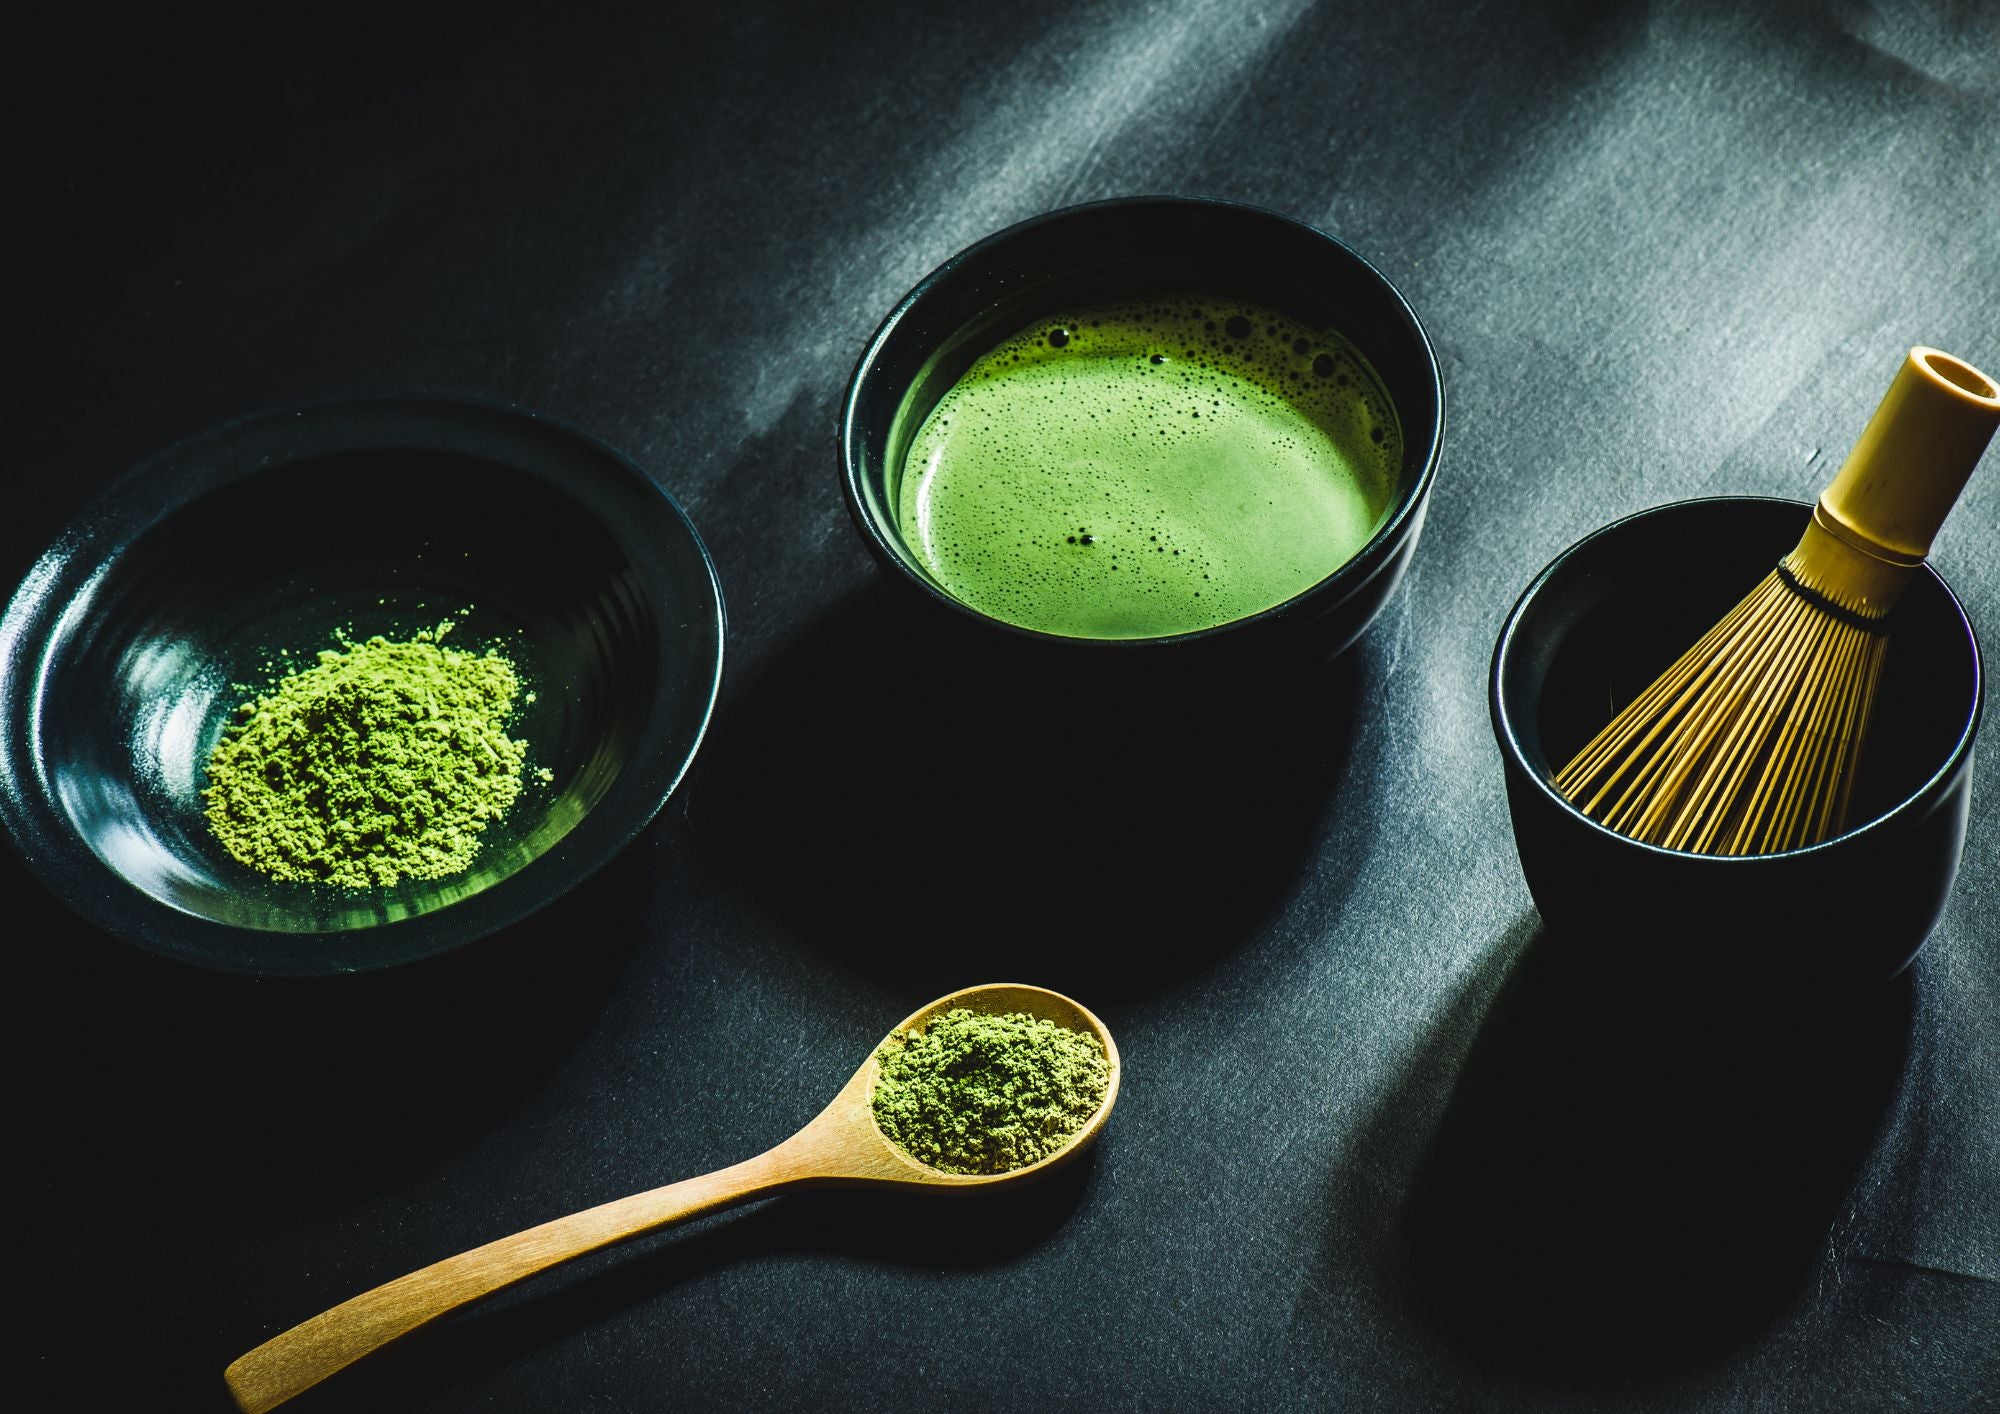 Which brand is good for matcha tea?